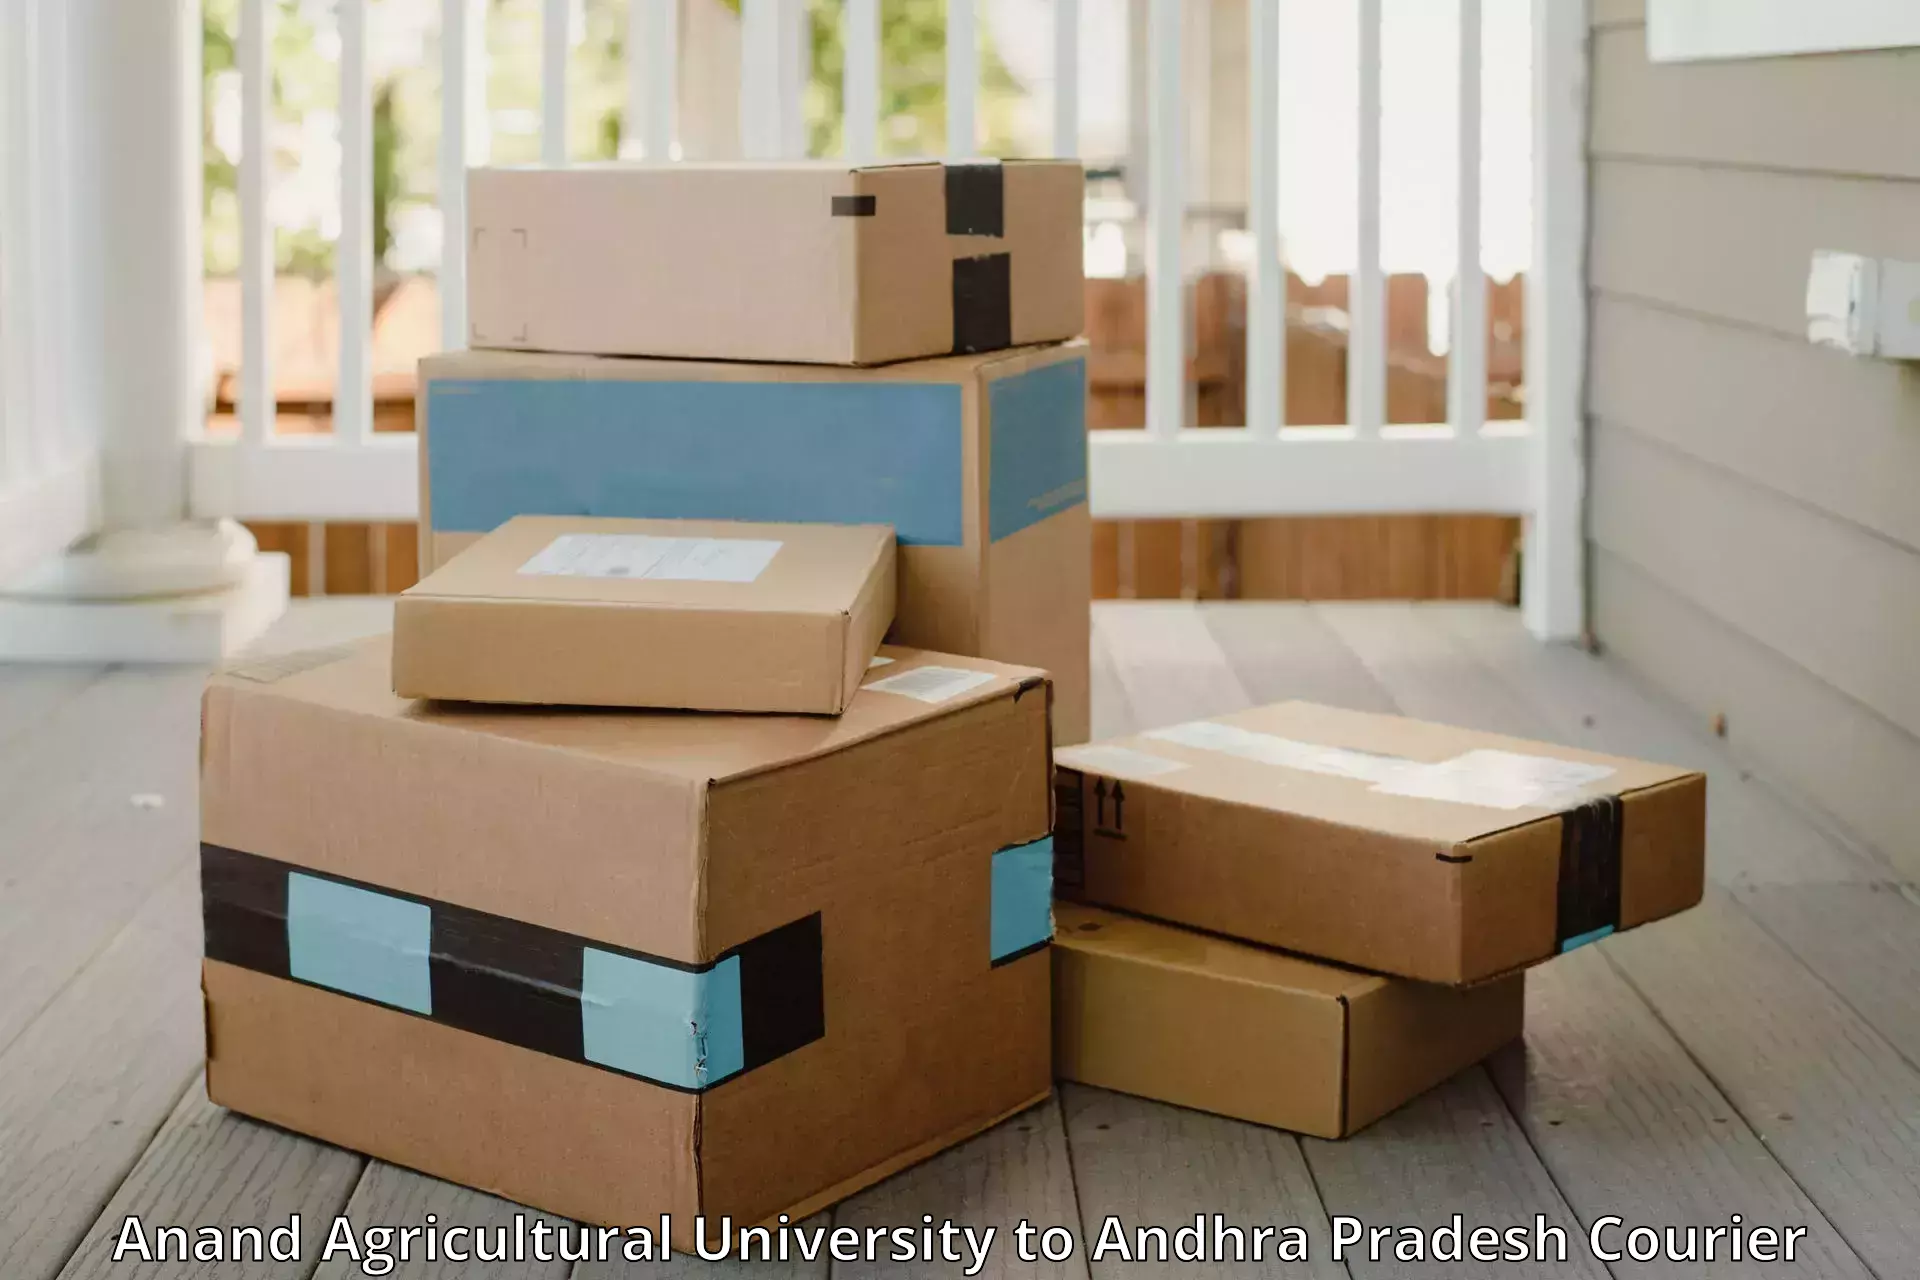 Luggage shipment strategy Anand Agricultural University to Tripuranthakam